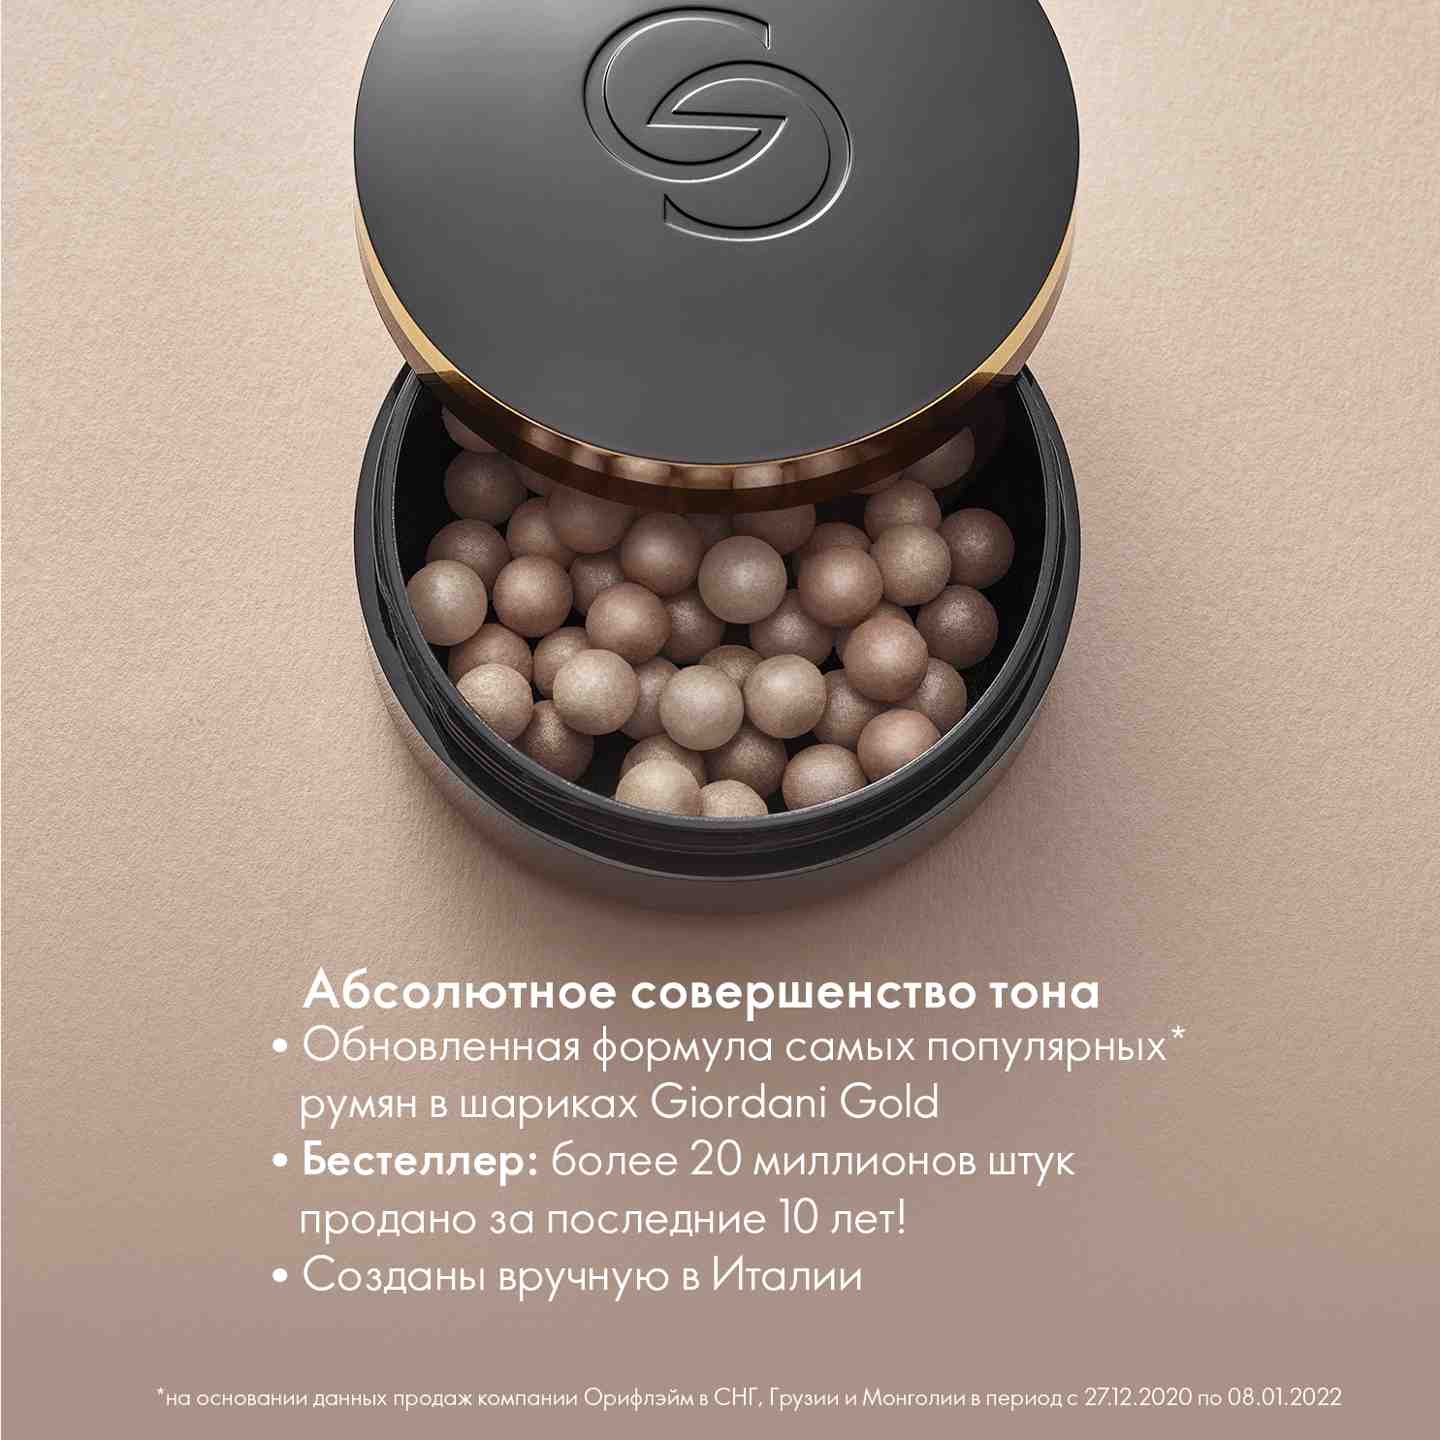 https://media-cdn.oriflame.com/productImage?externalMediaId=product-management-media%2fProducts%2f40951%2fBY%2f40951_3.png&id=16916692&version=1